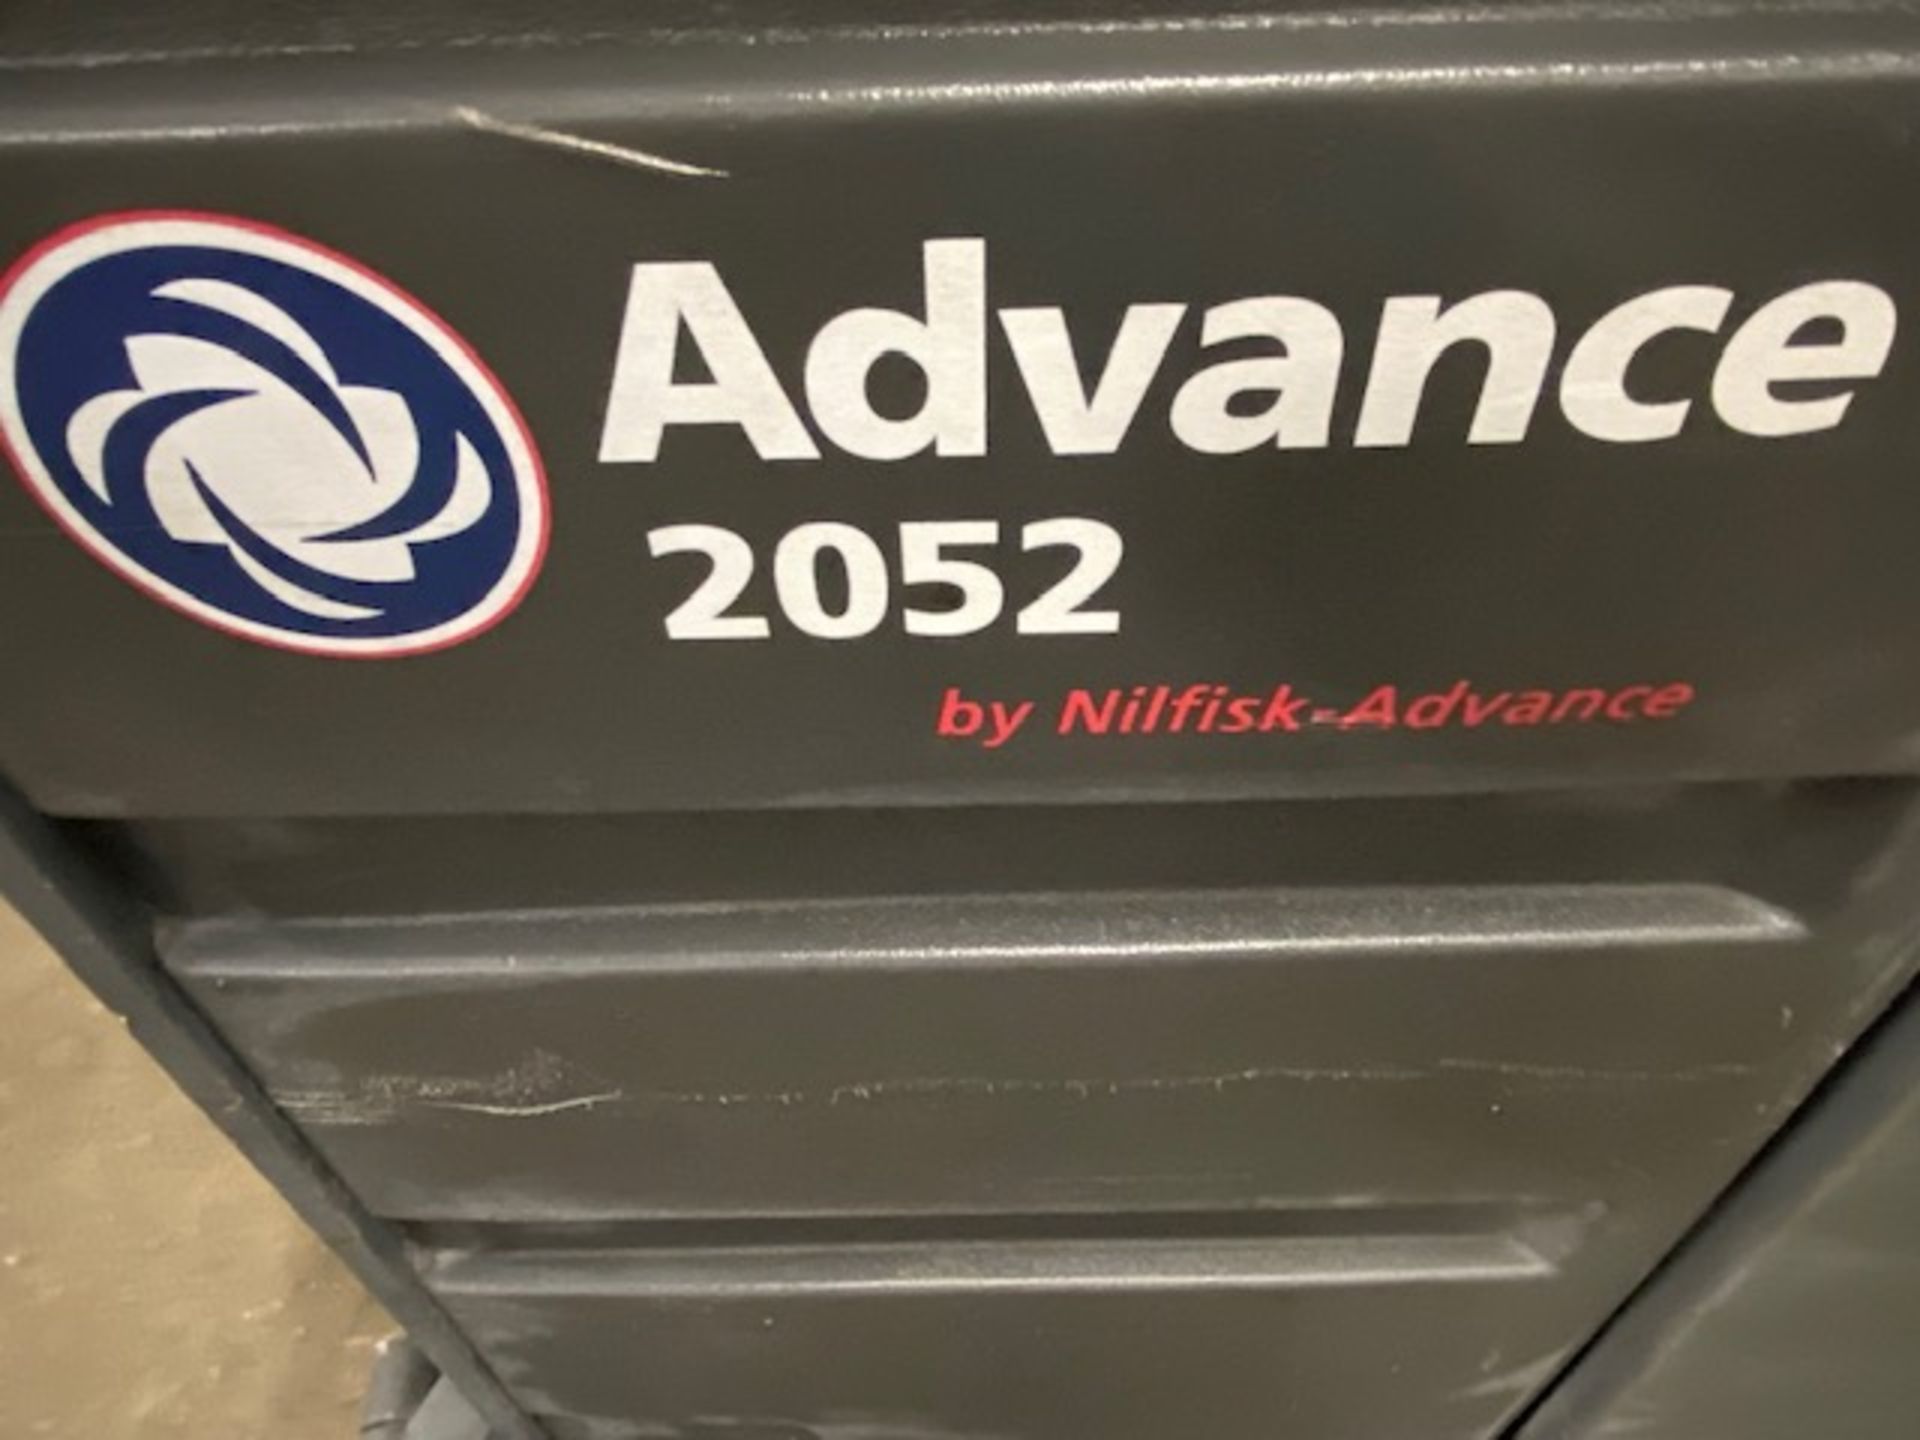 Advance Nilfisk Model 2052 Floor Cleaning Machine Sweeper Scrubber Unit LPG (propane) with LOW HOURS - Image 3 of 5